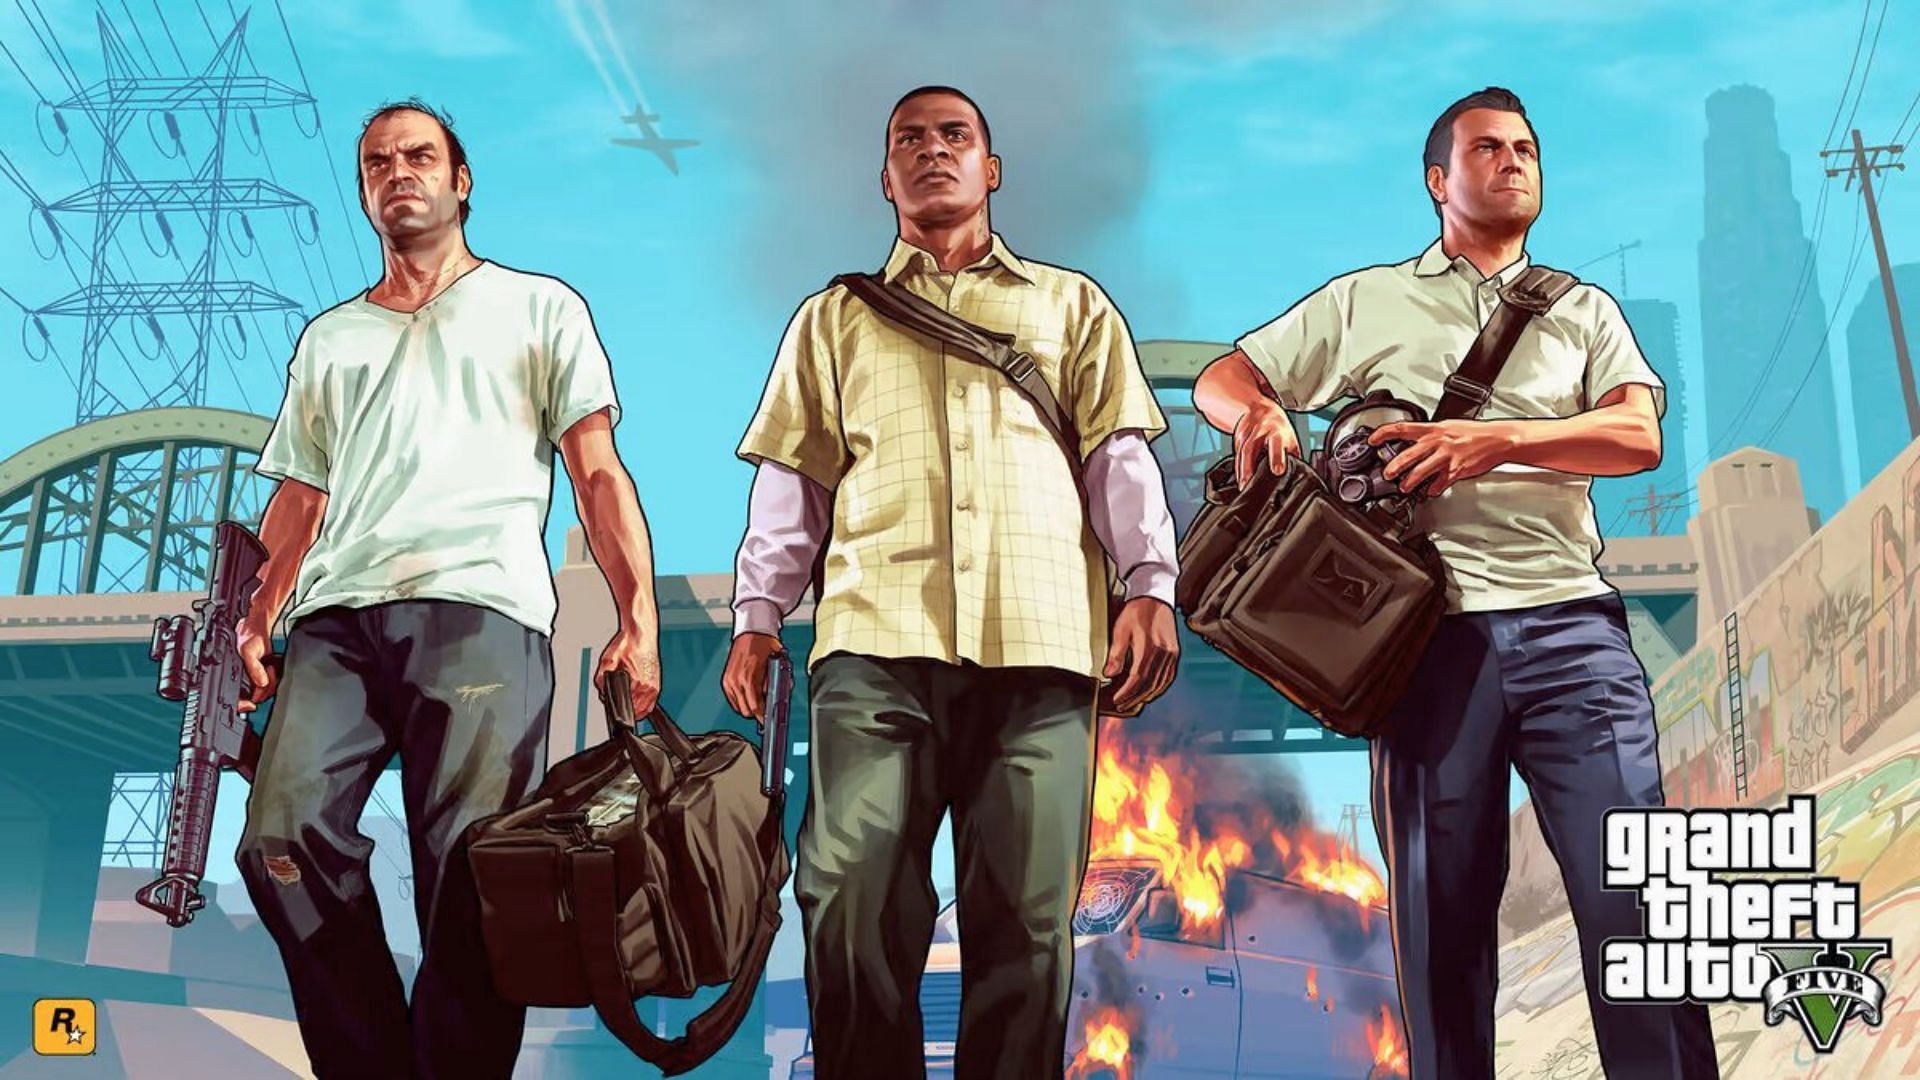 A brief report on GTA 5 making history with 200+ million copies sold to date as per Take-Two Interactive (Image via Rockstar Games)